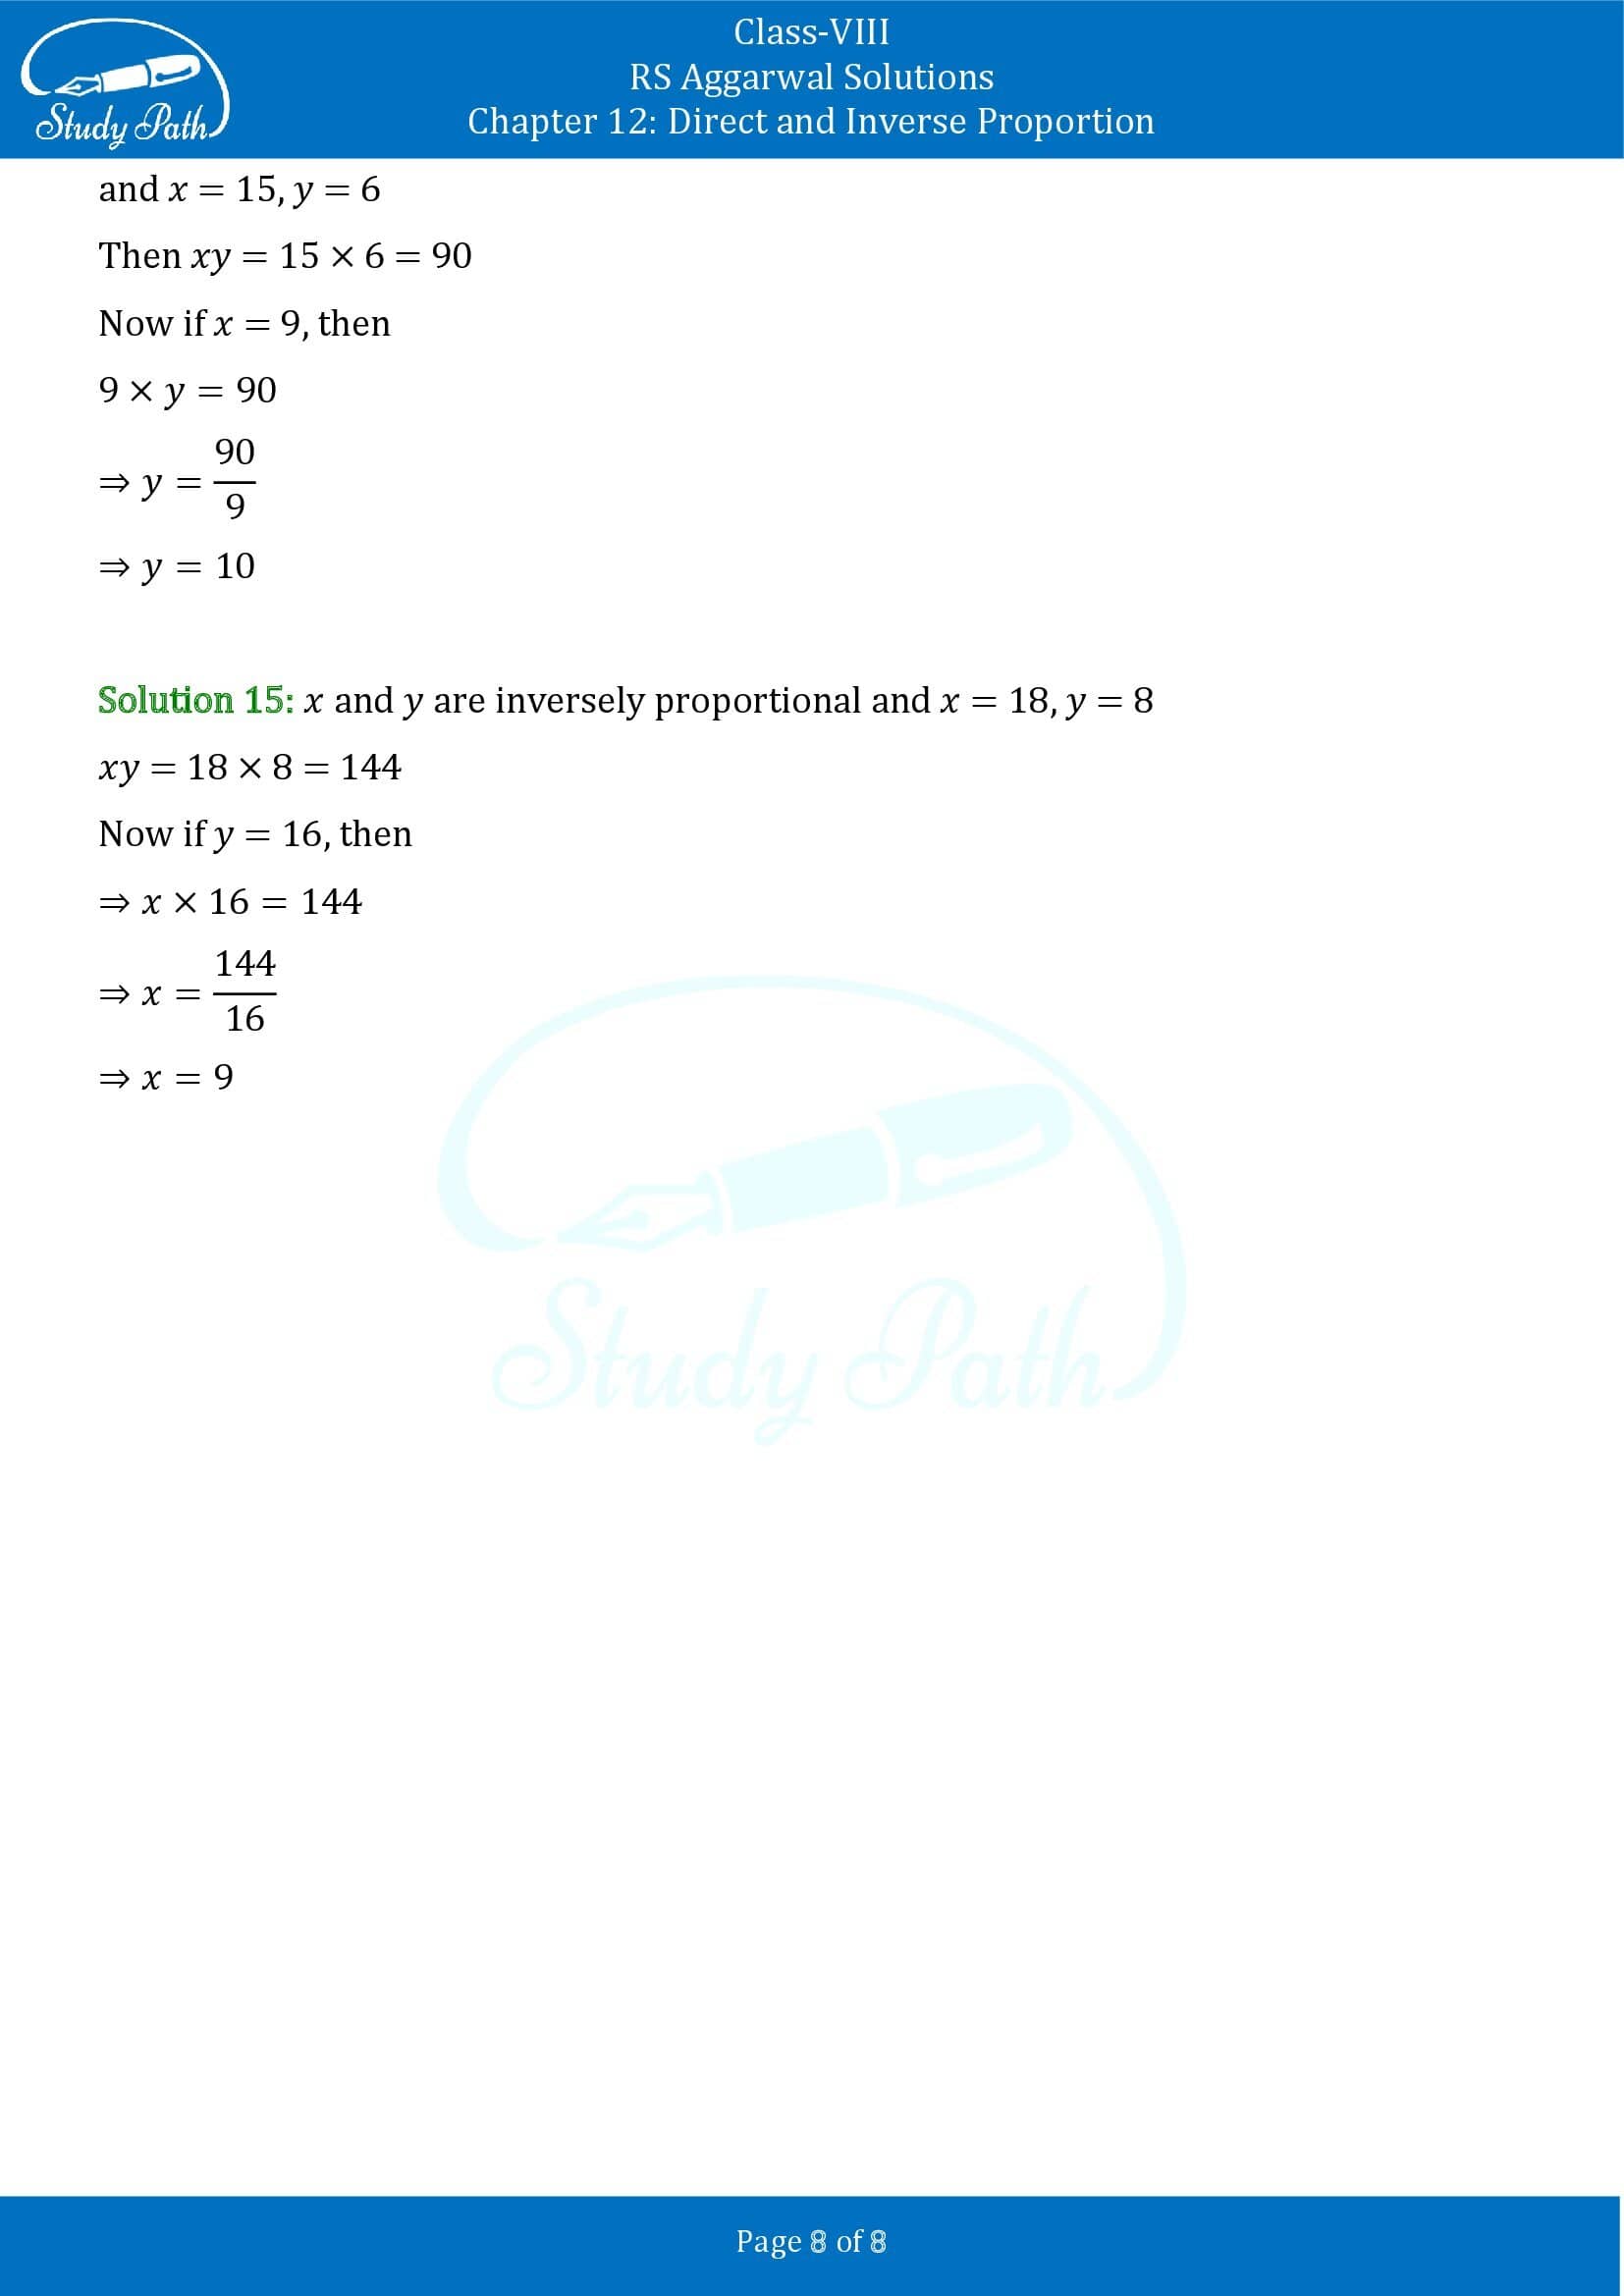 RS Aggarwal Solutions Class 8 Chapter 12 Direct and Inverse Proportion Exercise 12B 00008